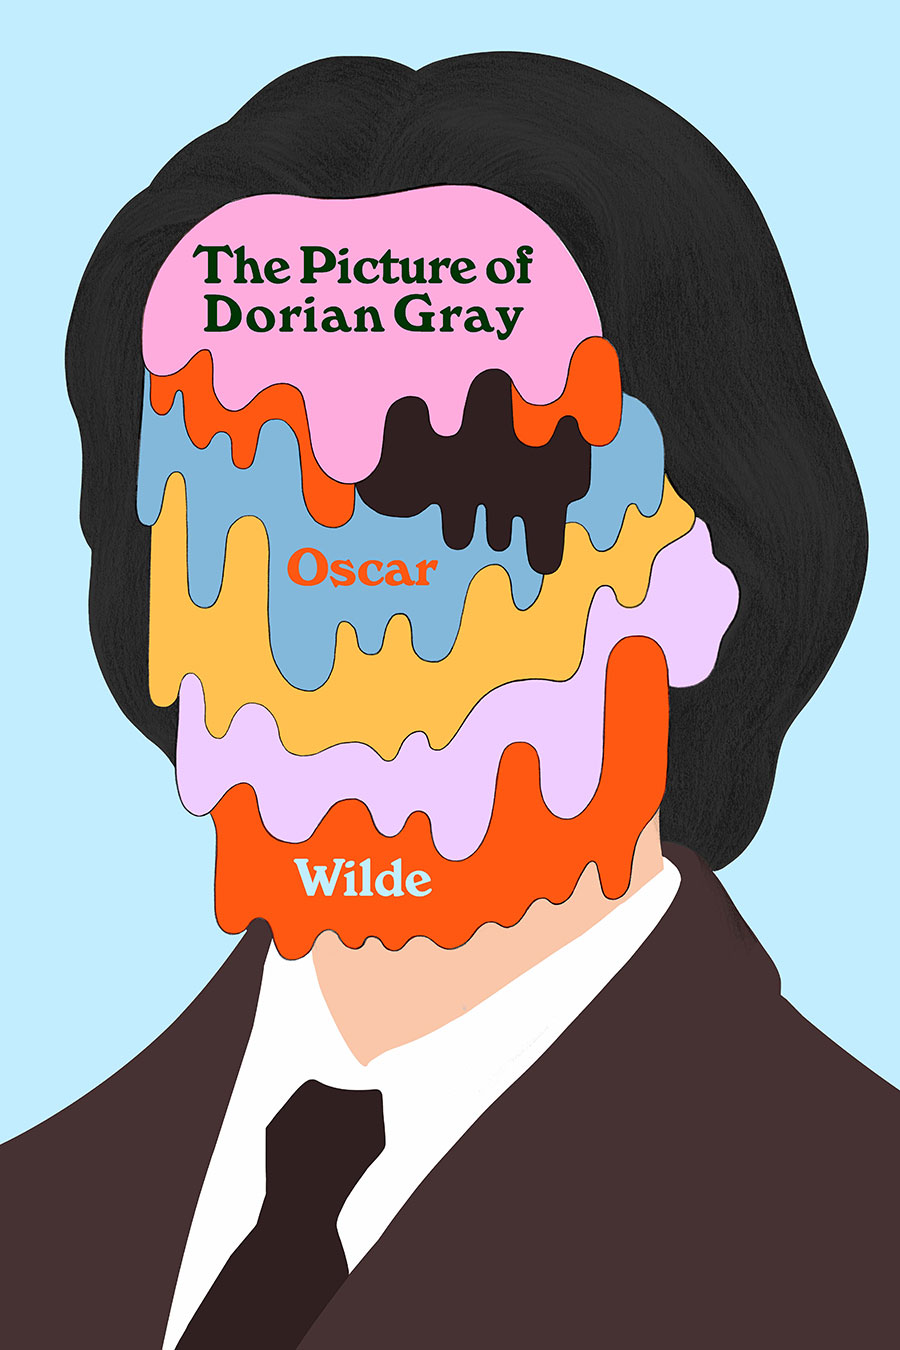 Cover Illustration for "The picture of Dorian Gray"